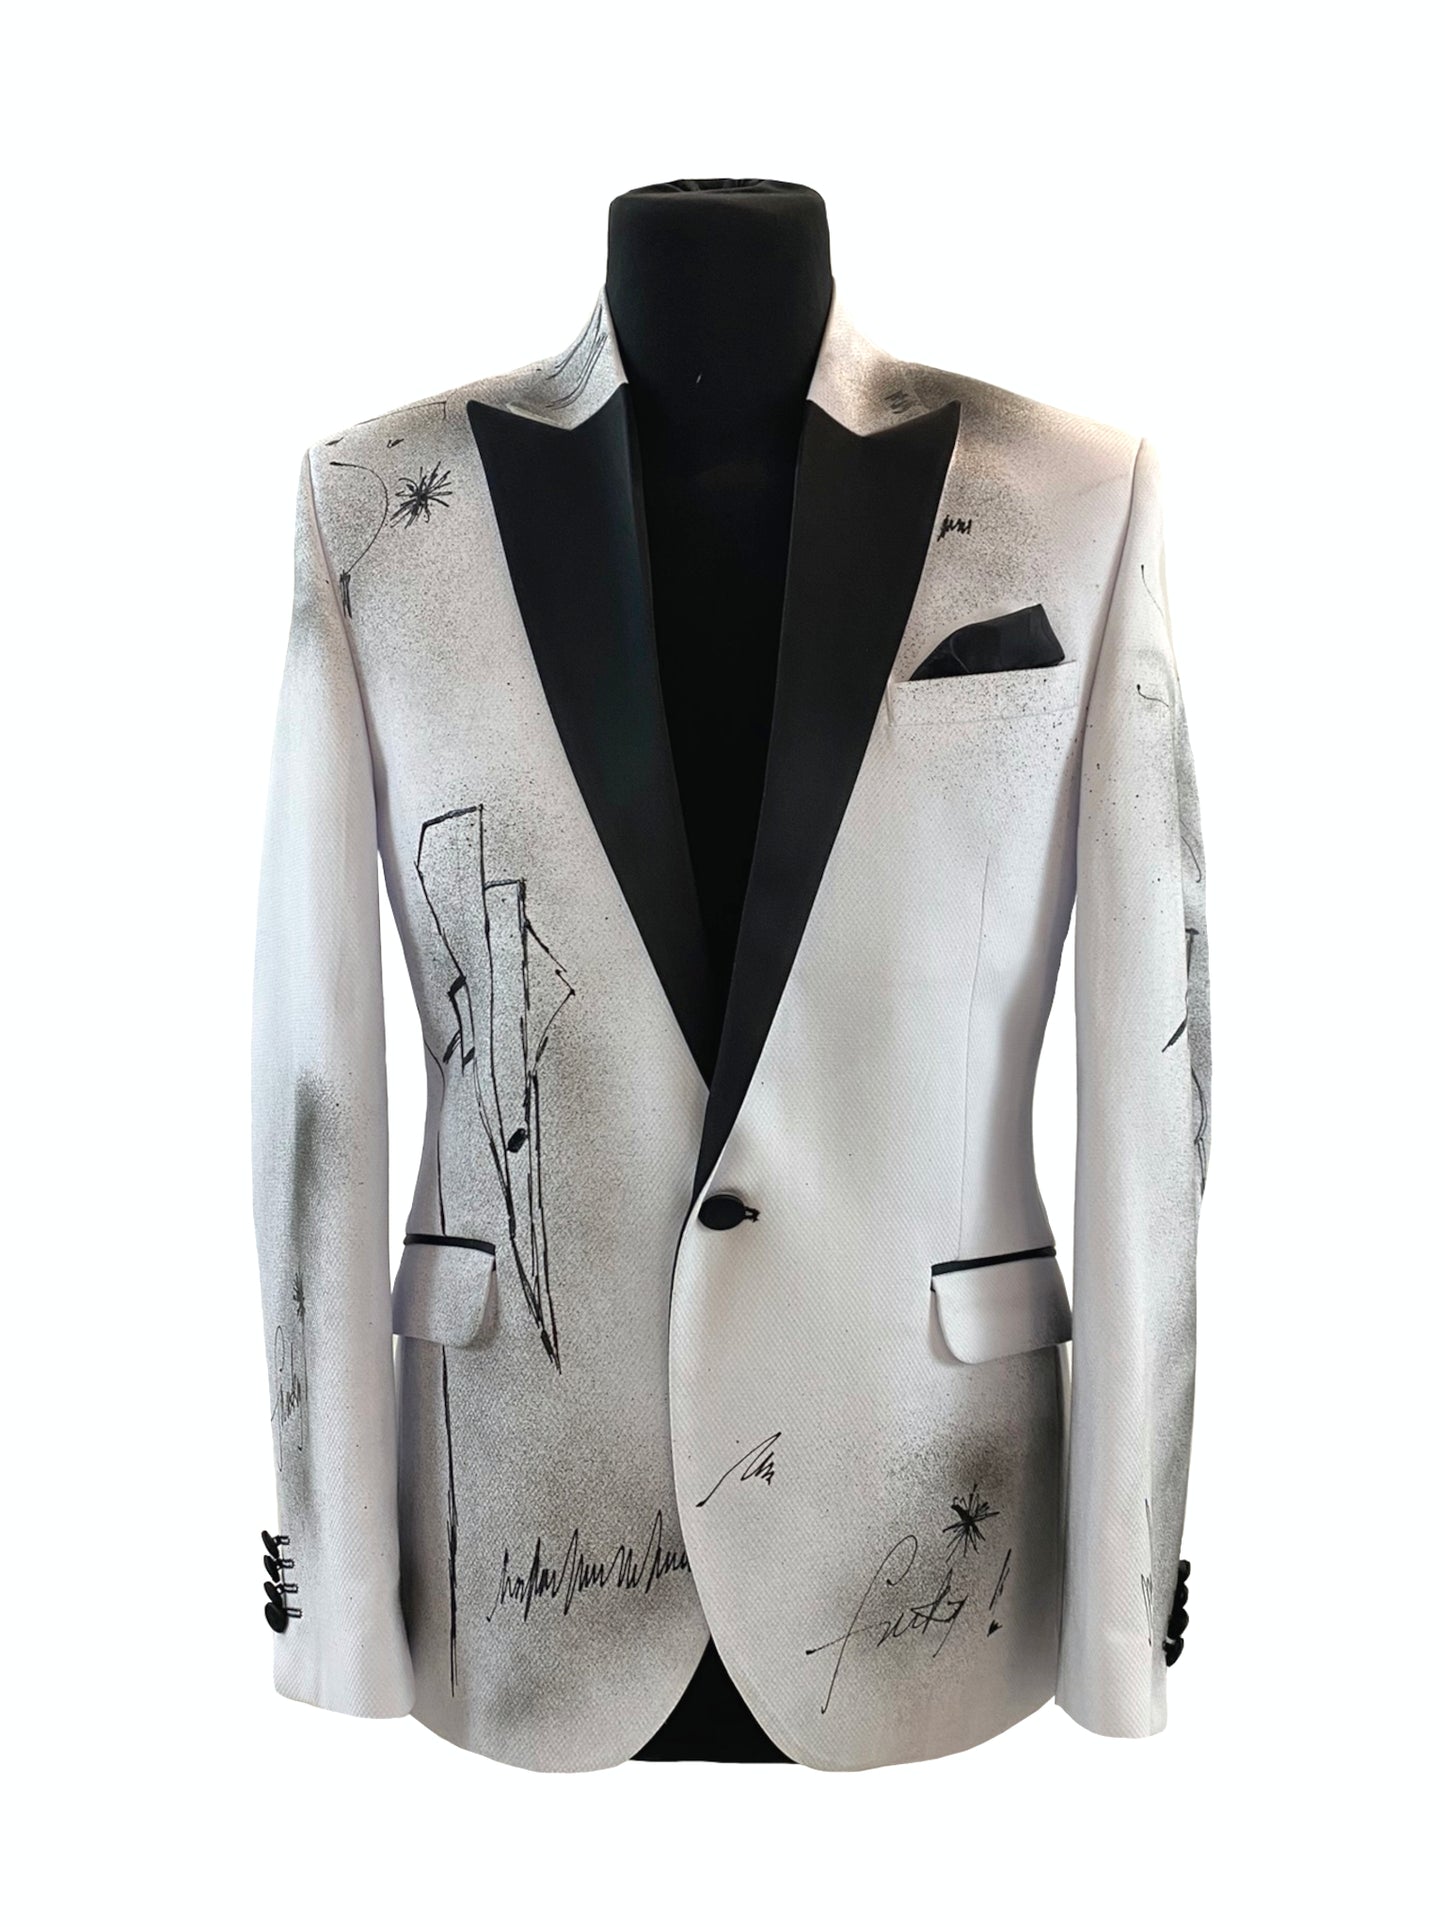 Unisex White Jacket with Handpainted Details